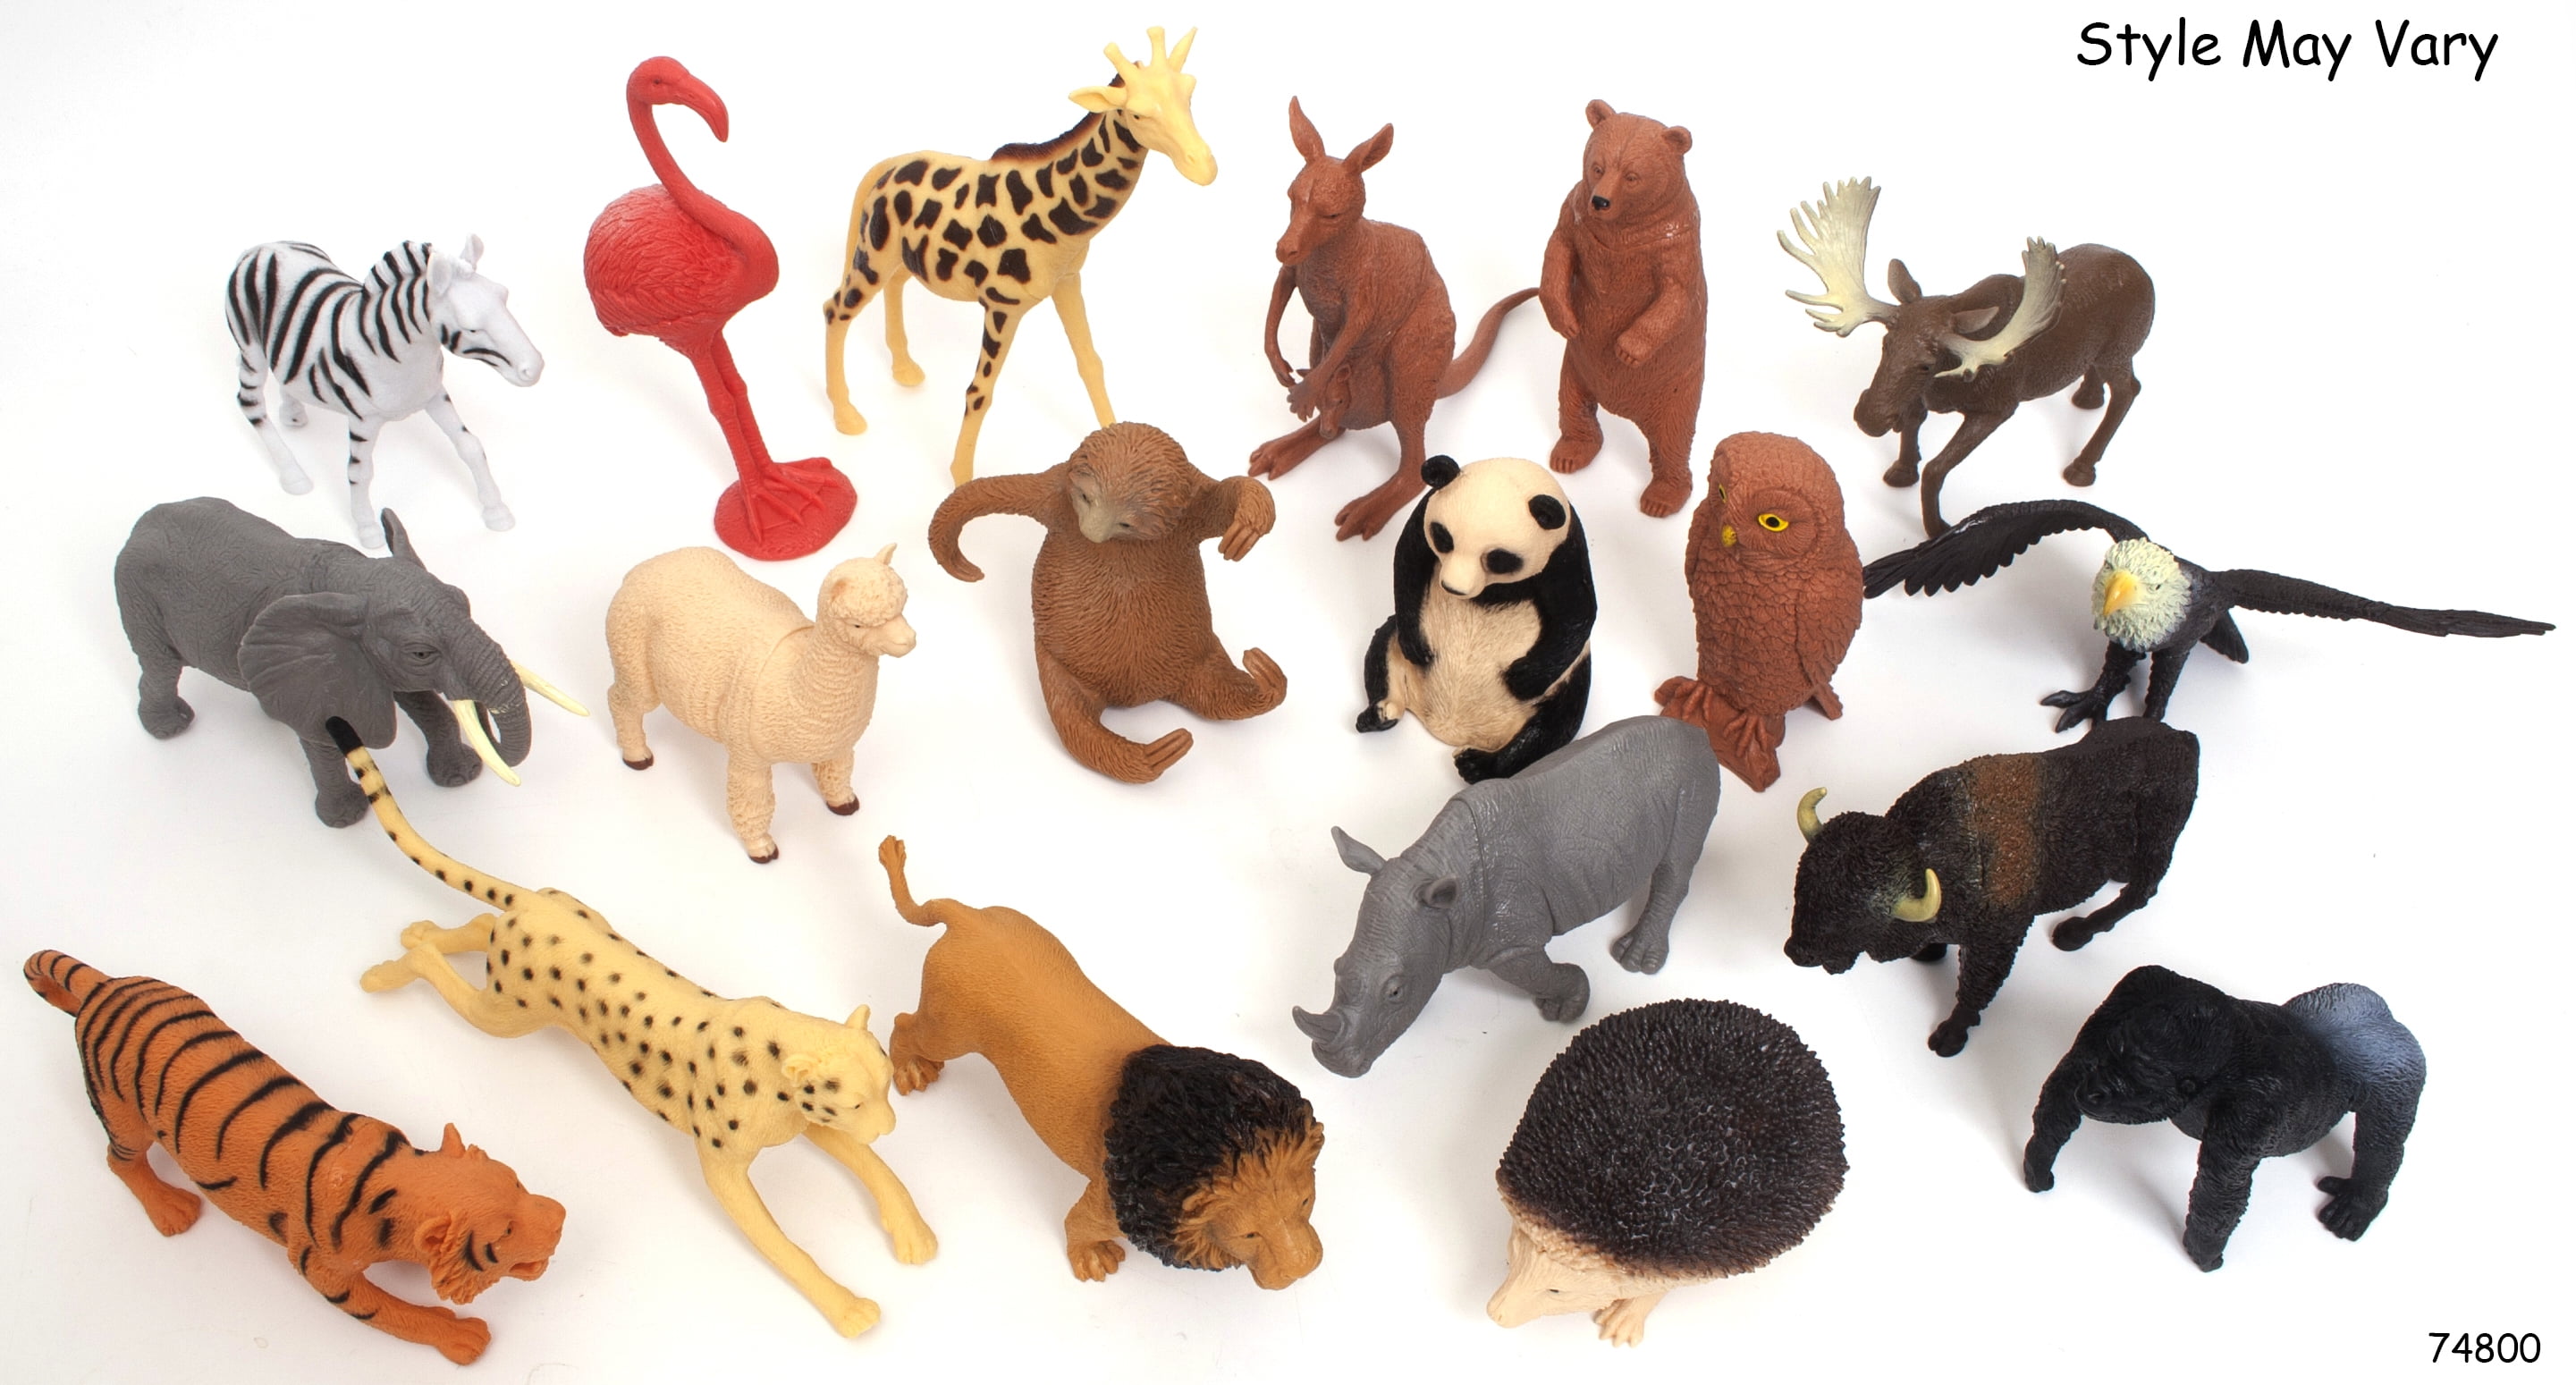 Large Cats & Dogs Assorted Animal Toy Figures Bundle 4 Inches Bulk - 24 Pieces 